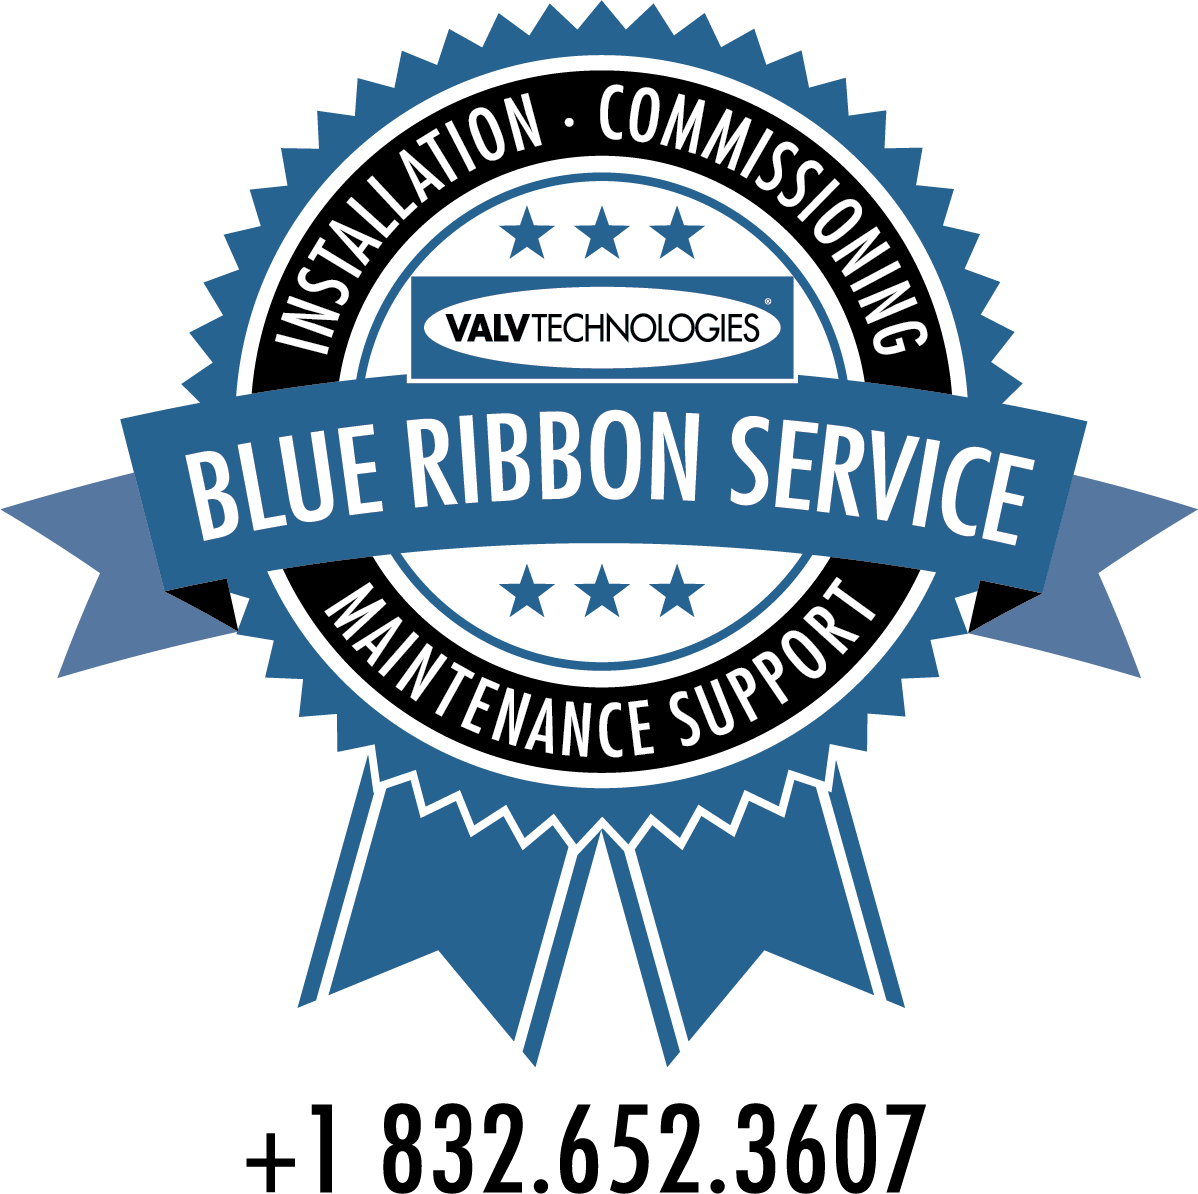 Blue Ribbon Logo - Blue Ribbon Service onsite support between shipment and operation